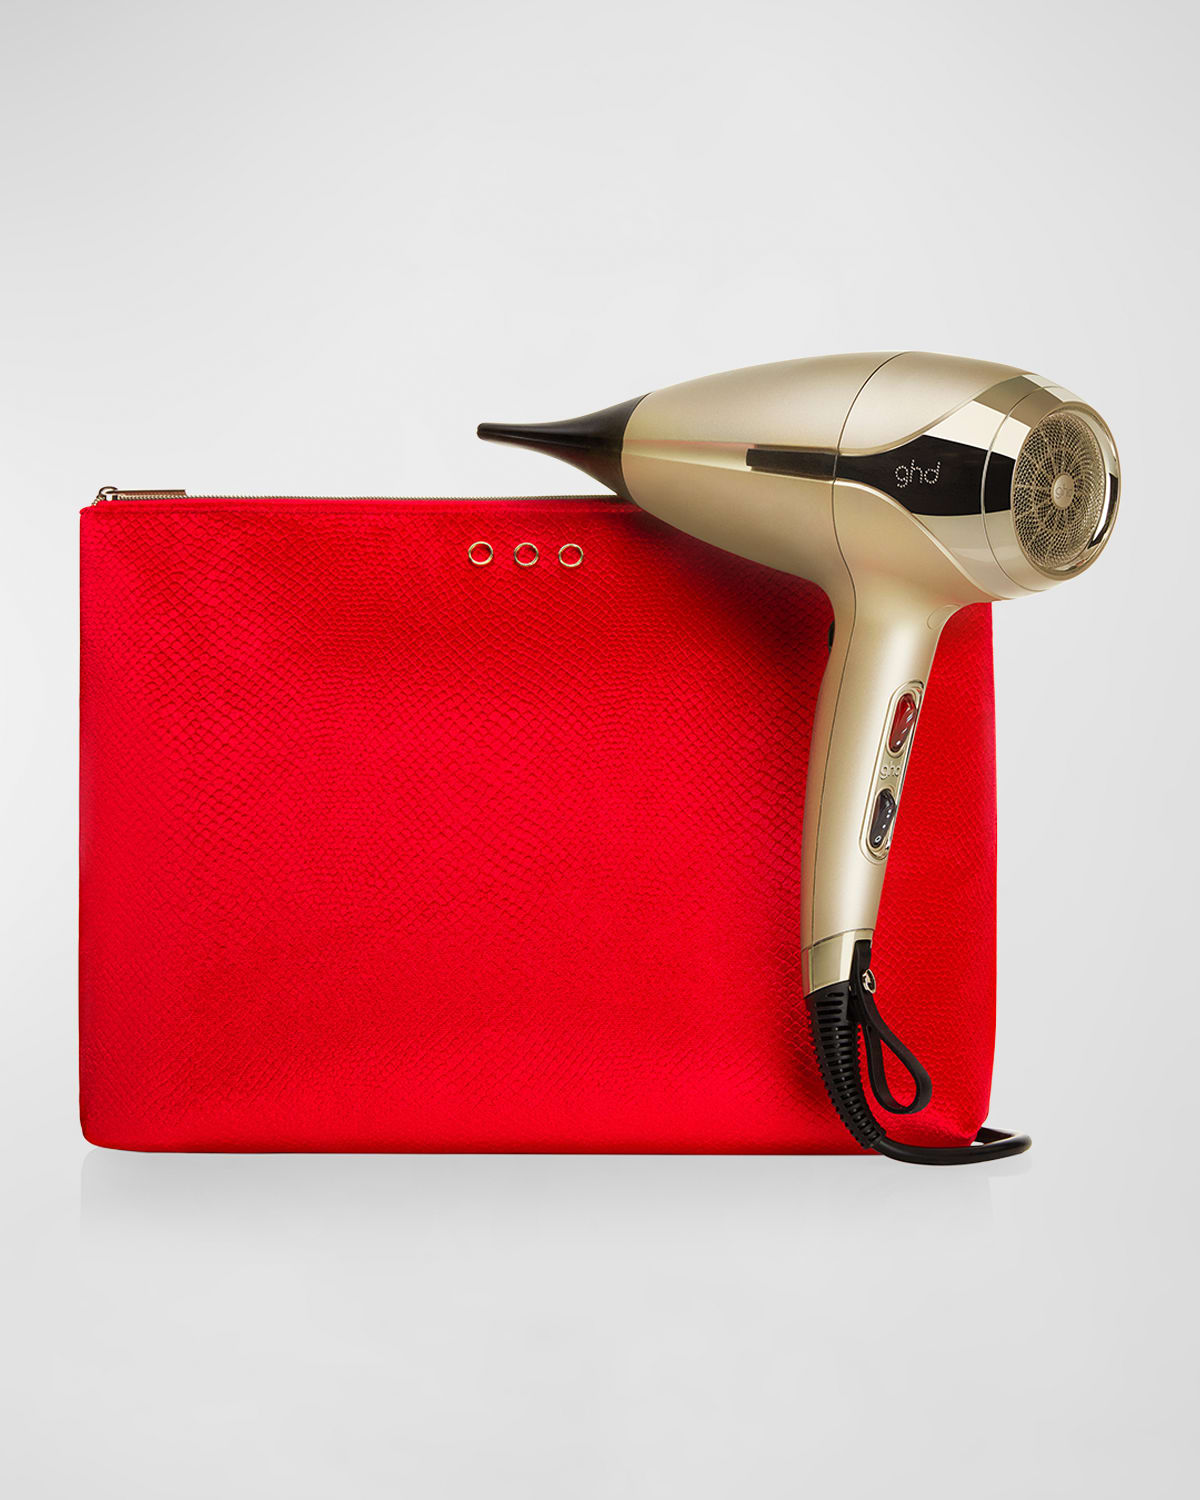 ghd Helios 1875W Advanced Professional Hair Dryer, Champagne Gold - Limited Edition